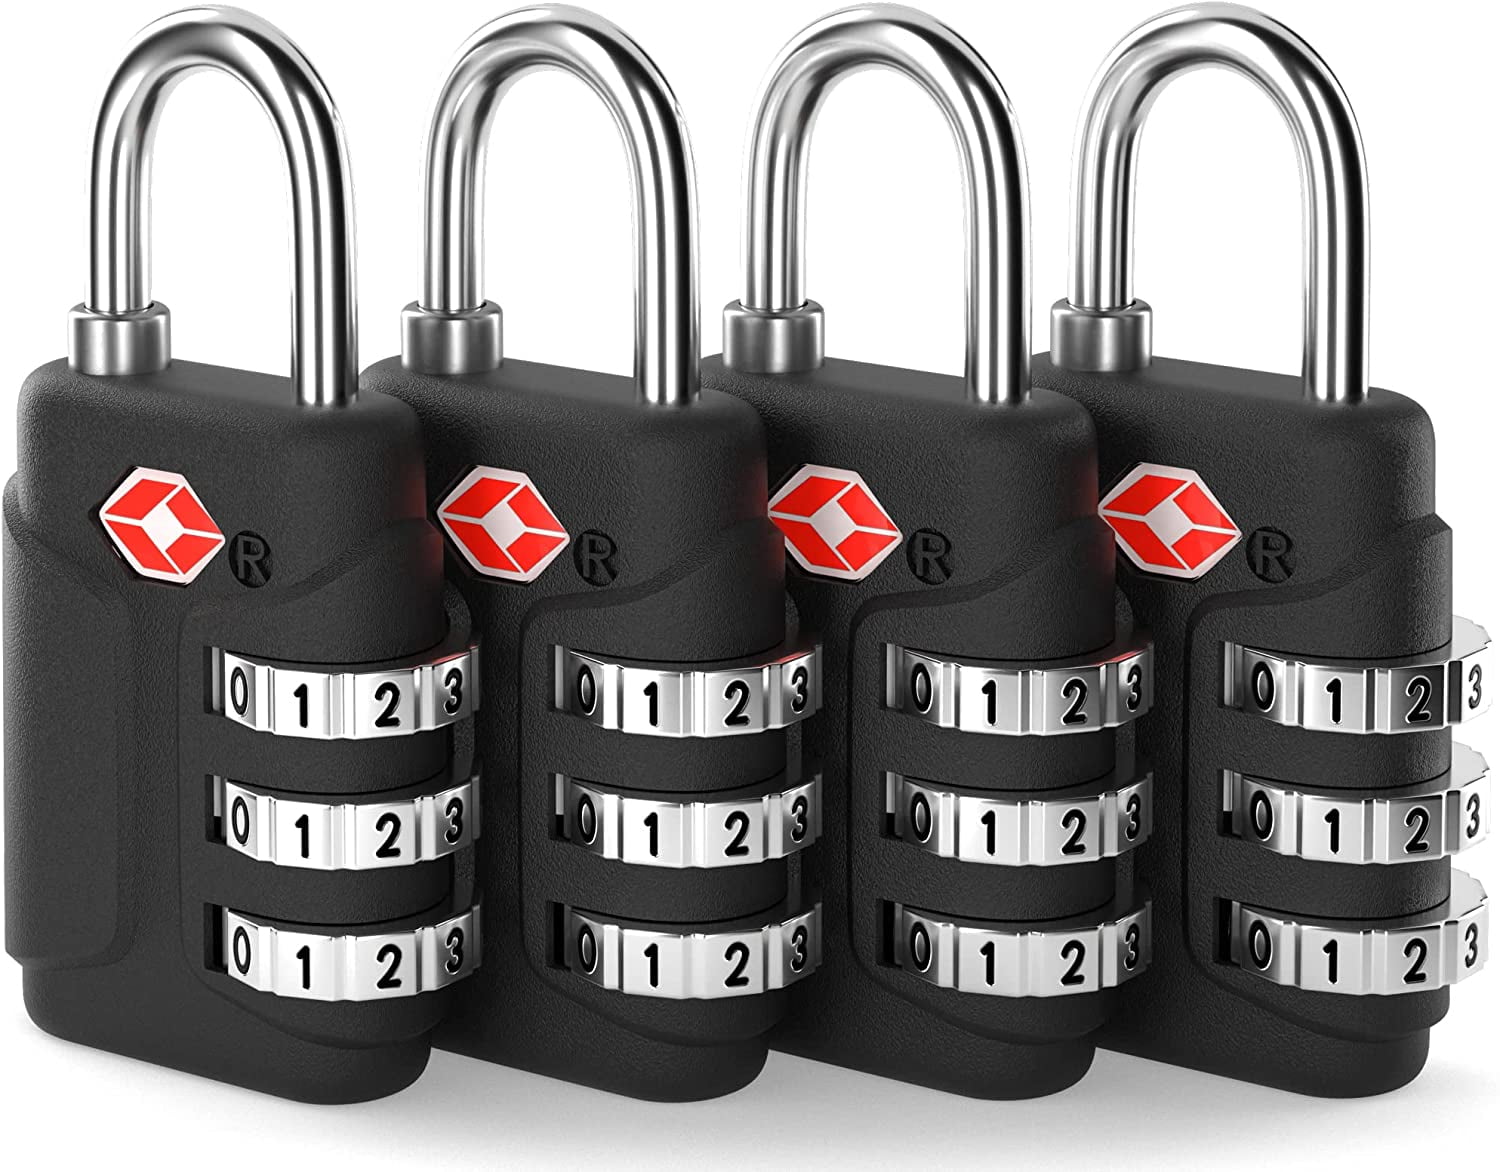 Juvale 4 Pack Mini Luggage Locks, Small Colorful Padlocks For Travel  Suitcase & Backpack With Keys : Target